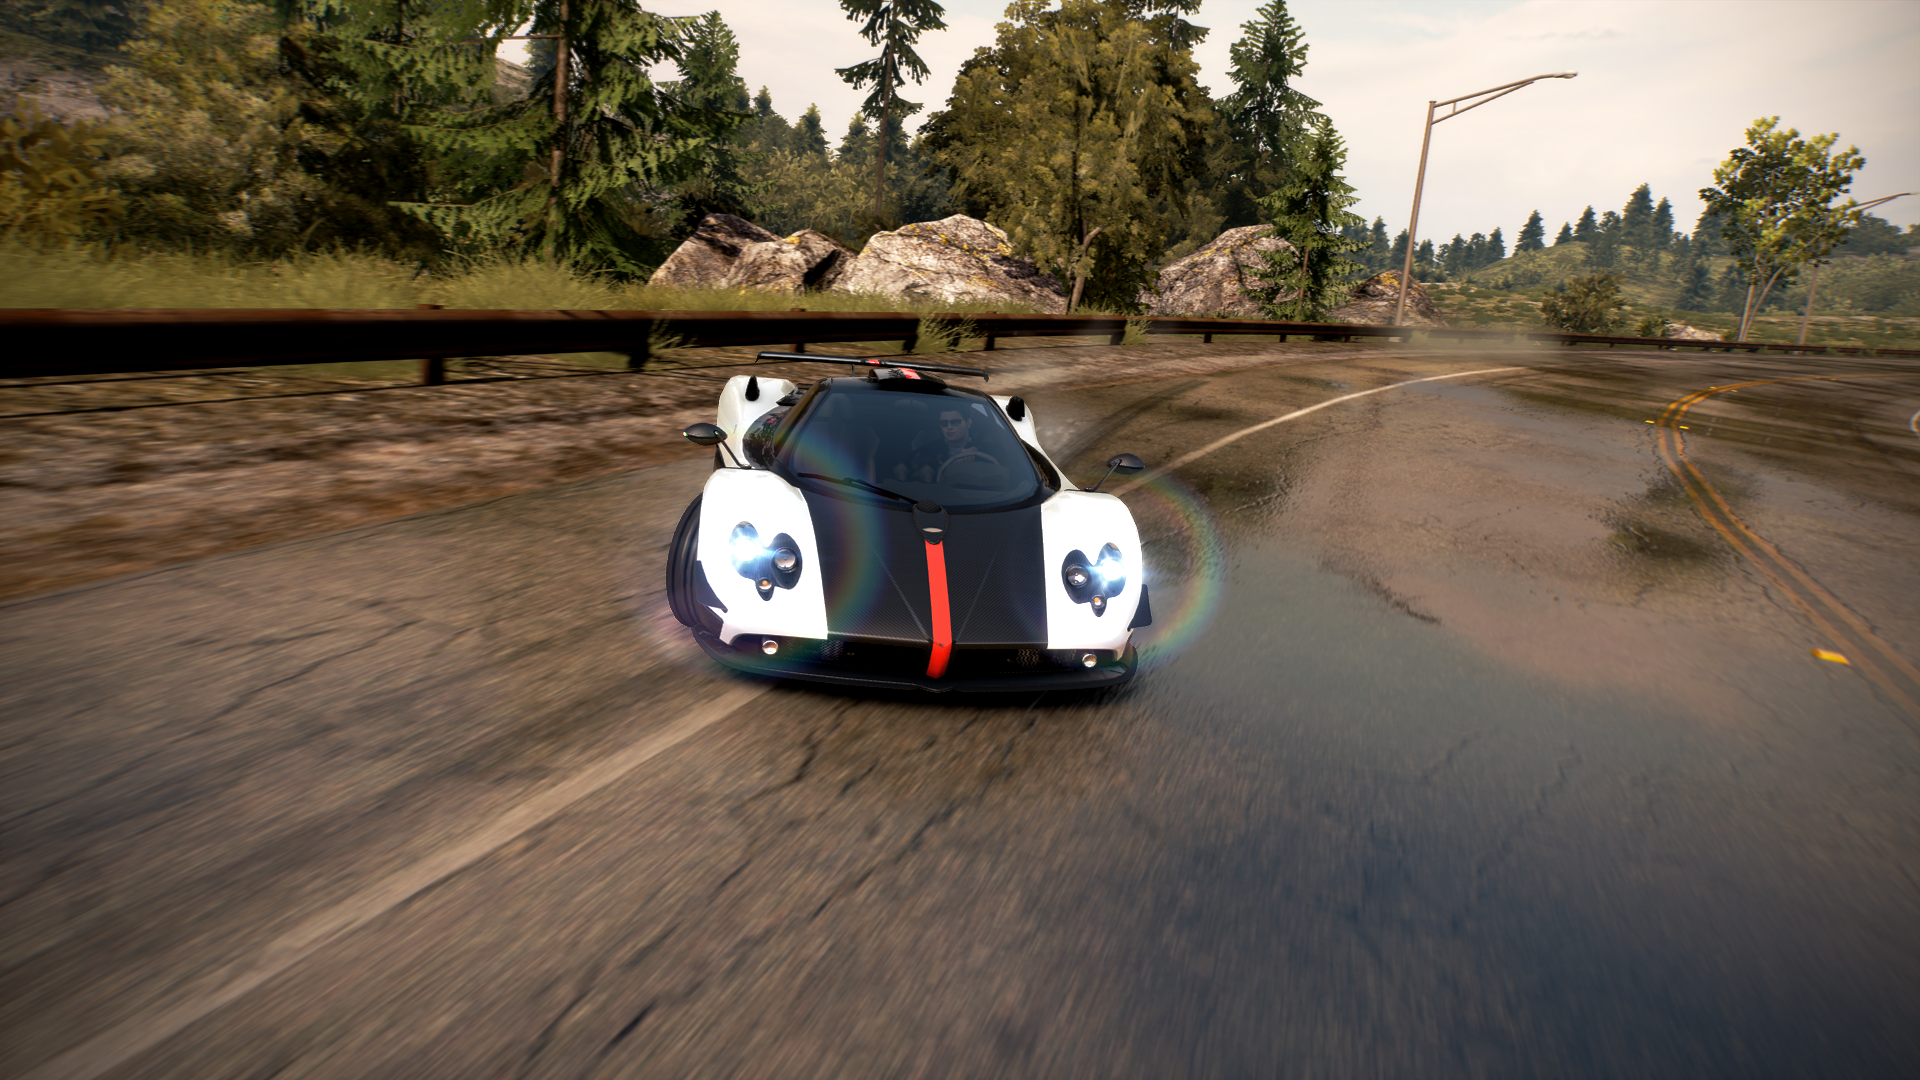 Need For Speed Hot Pursuit Need For Speed Car Pagani Zonda Cinque Screen Shot 1920x1080